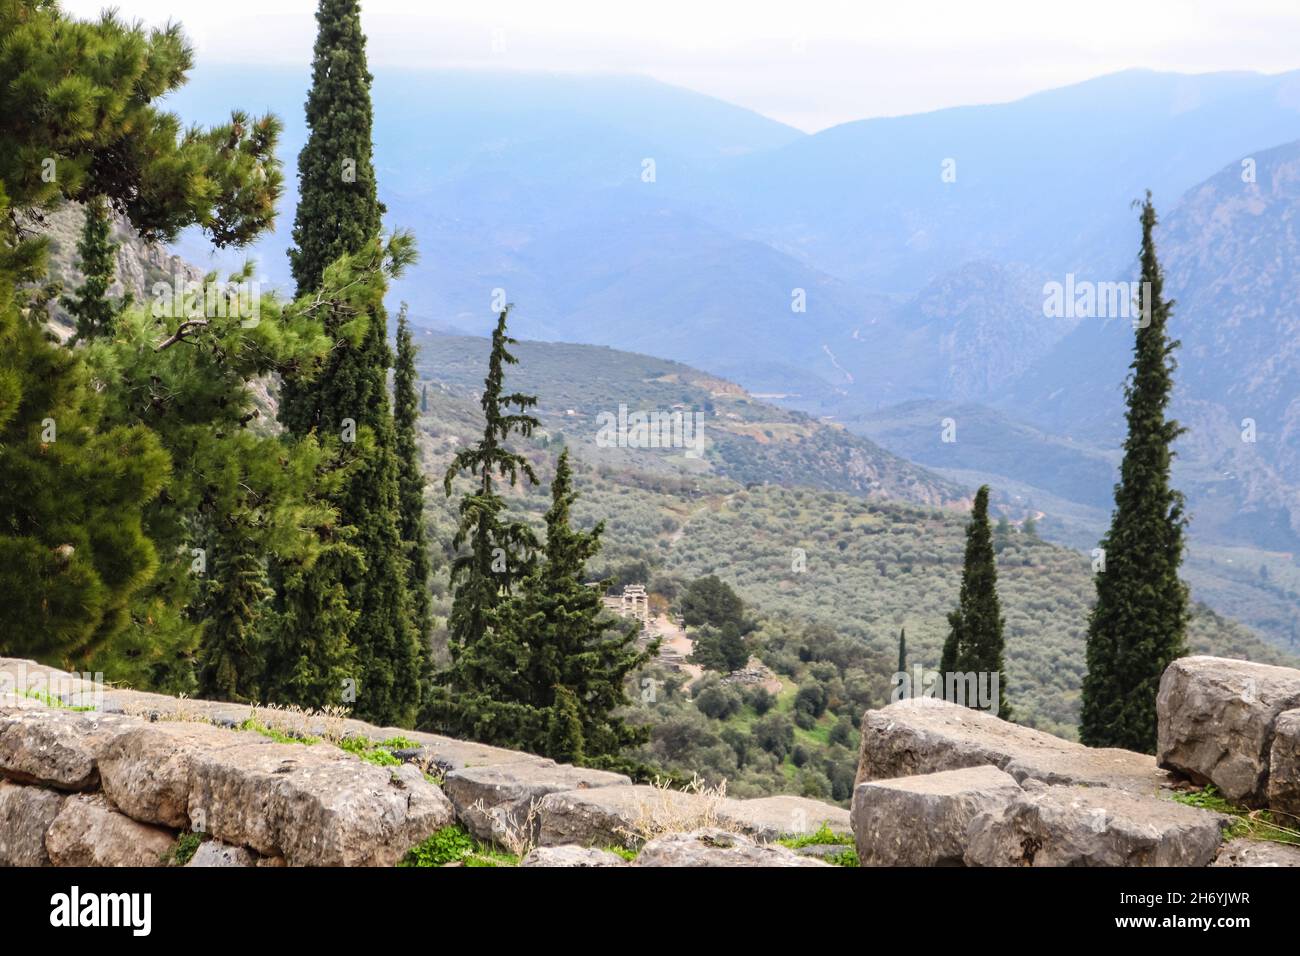 View from mountainside archeological site of Ancient Delphi Greece looking down into valley and at Temple of Athena below Stock Photo